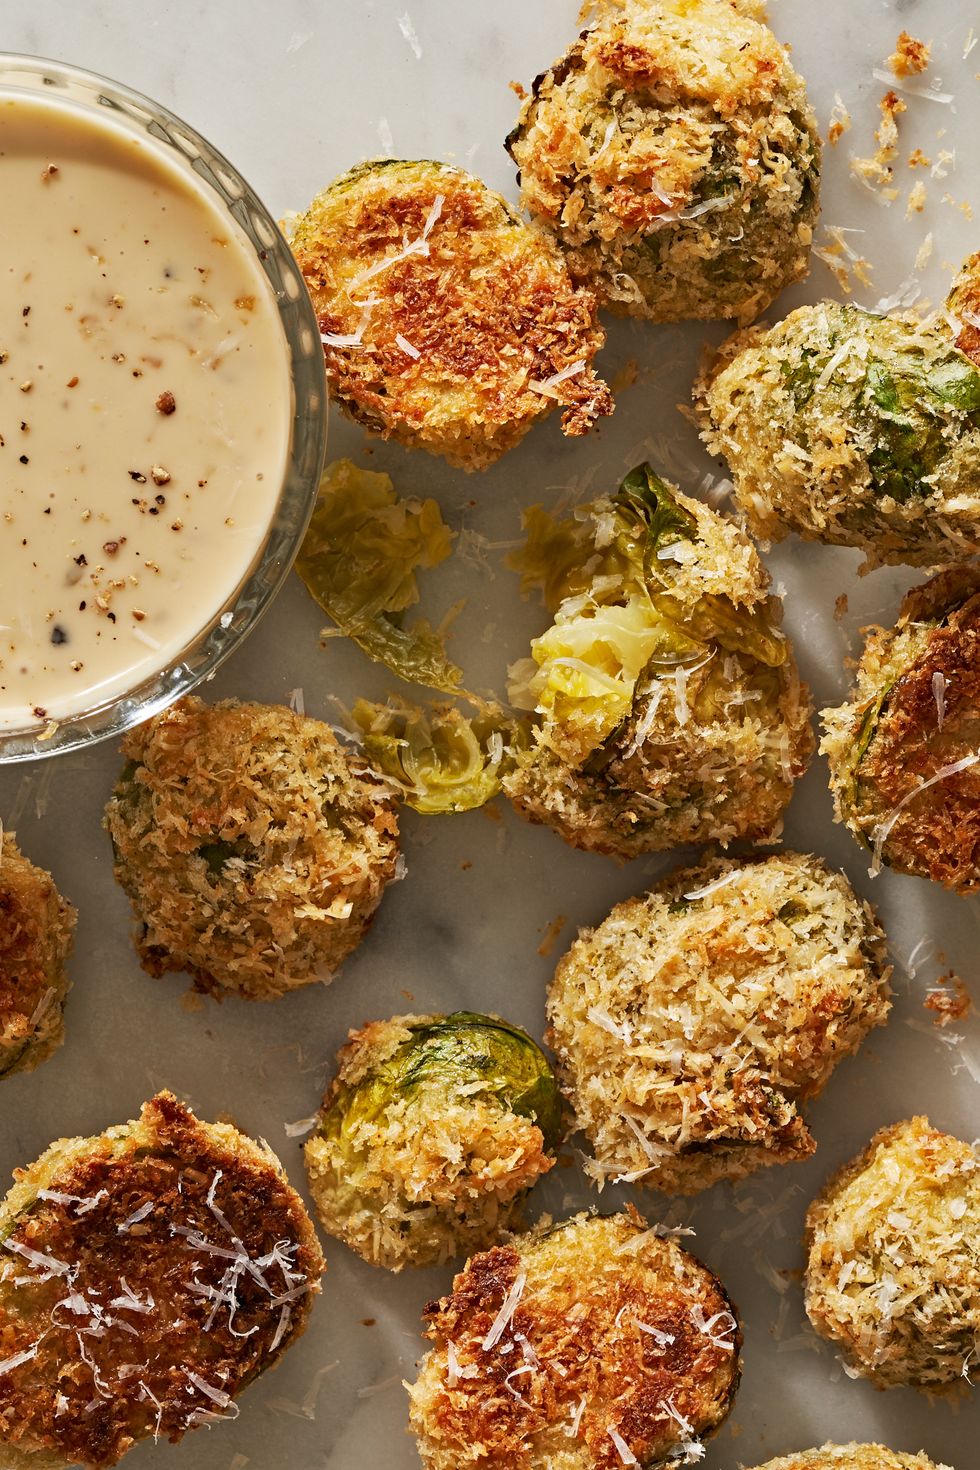 https://hips.hearstapps.com/hmg-prod/images/parmesan-roasted-brussels-sprouts2-1671199887.jpg?crop=0.9997727789138833xw:1xh;center,top&resize=980:*